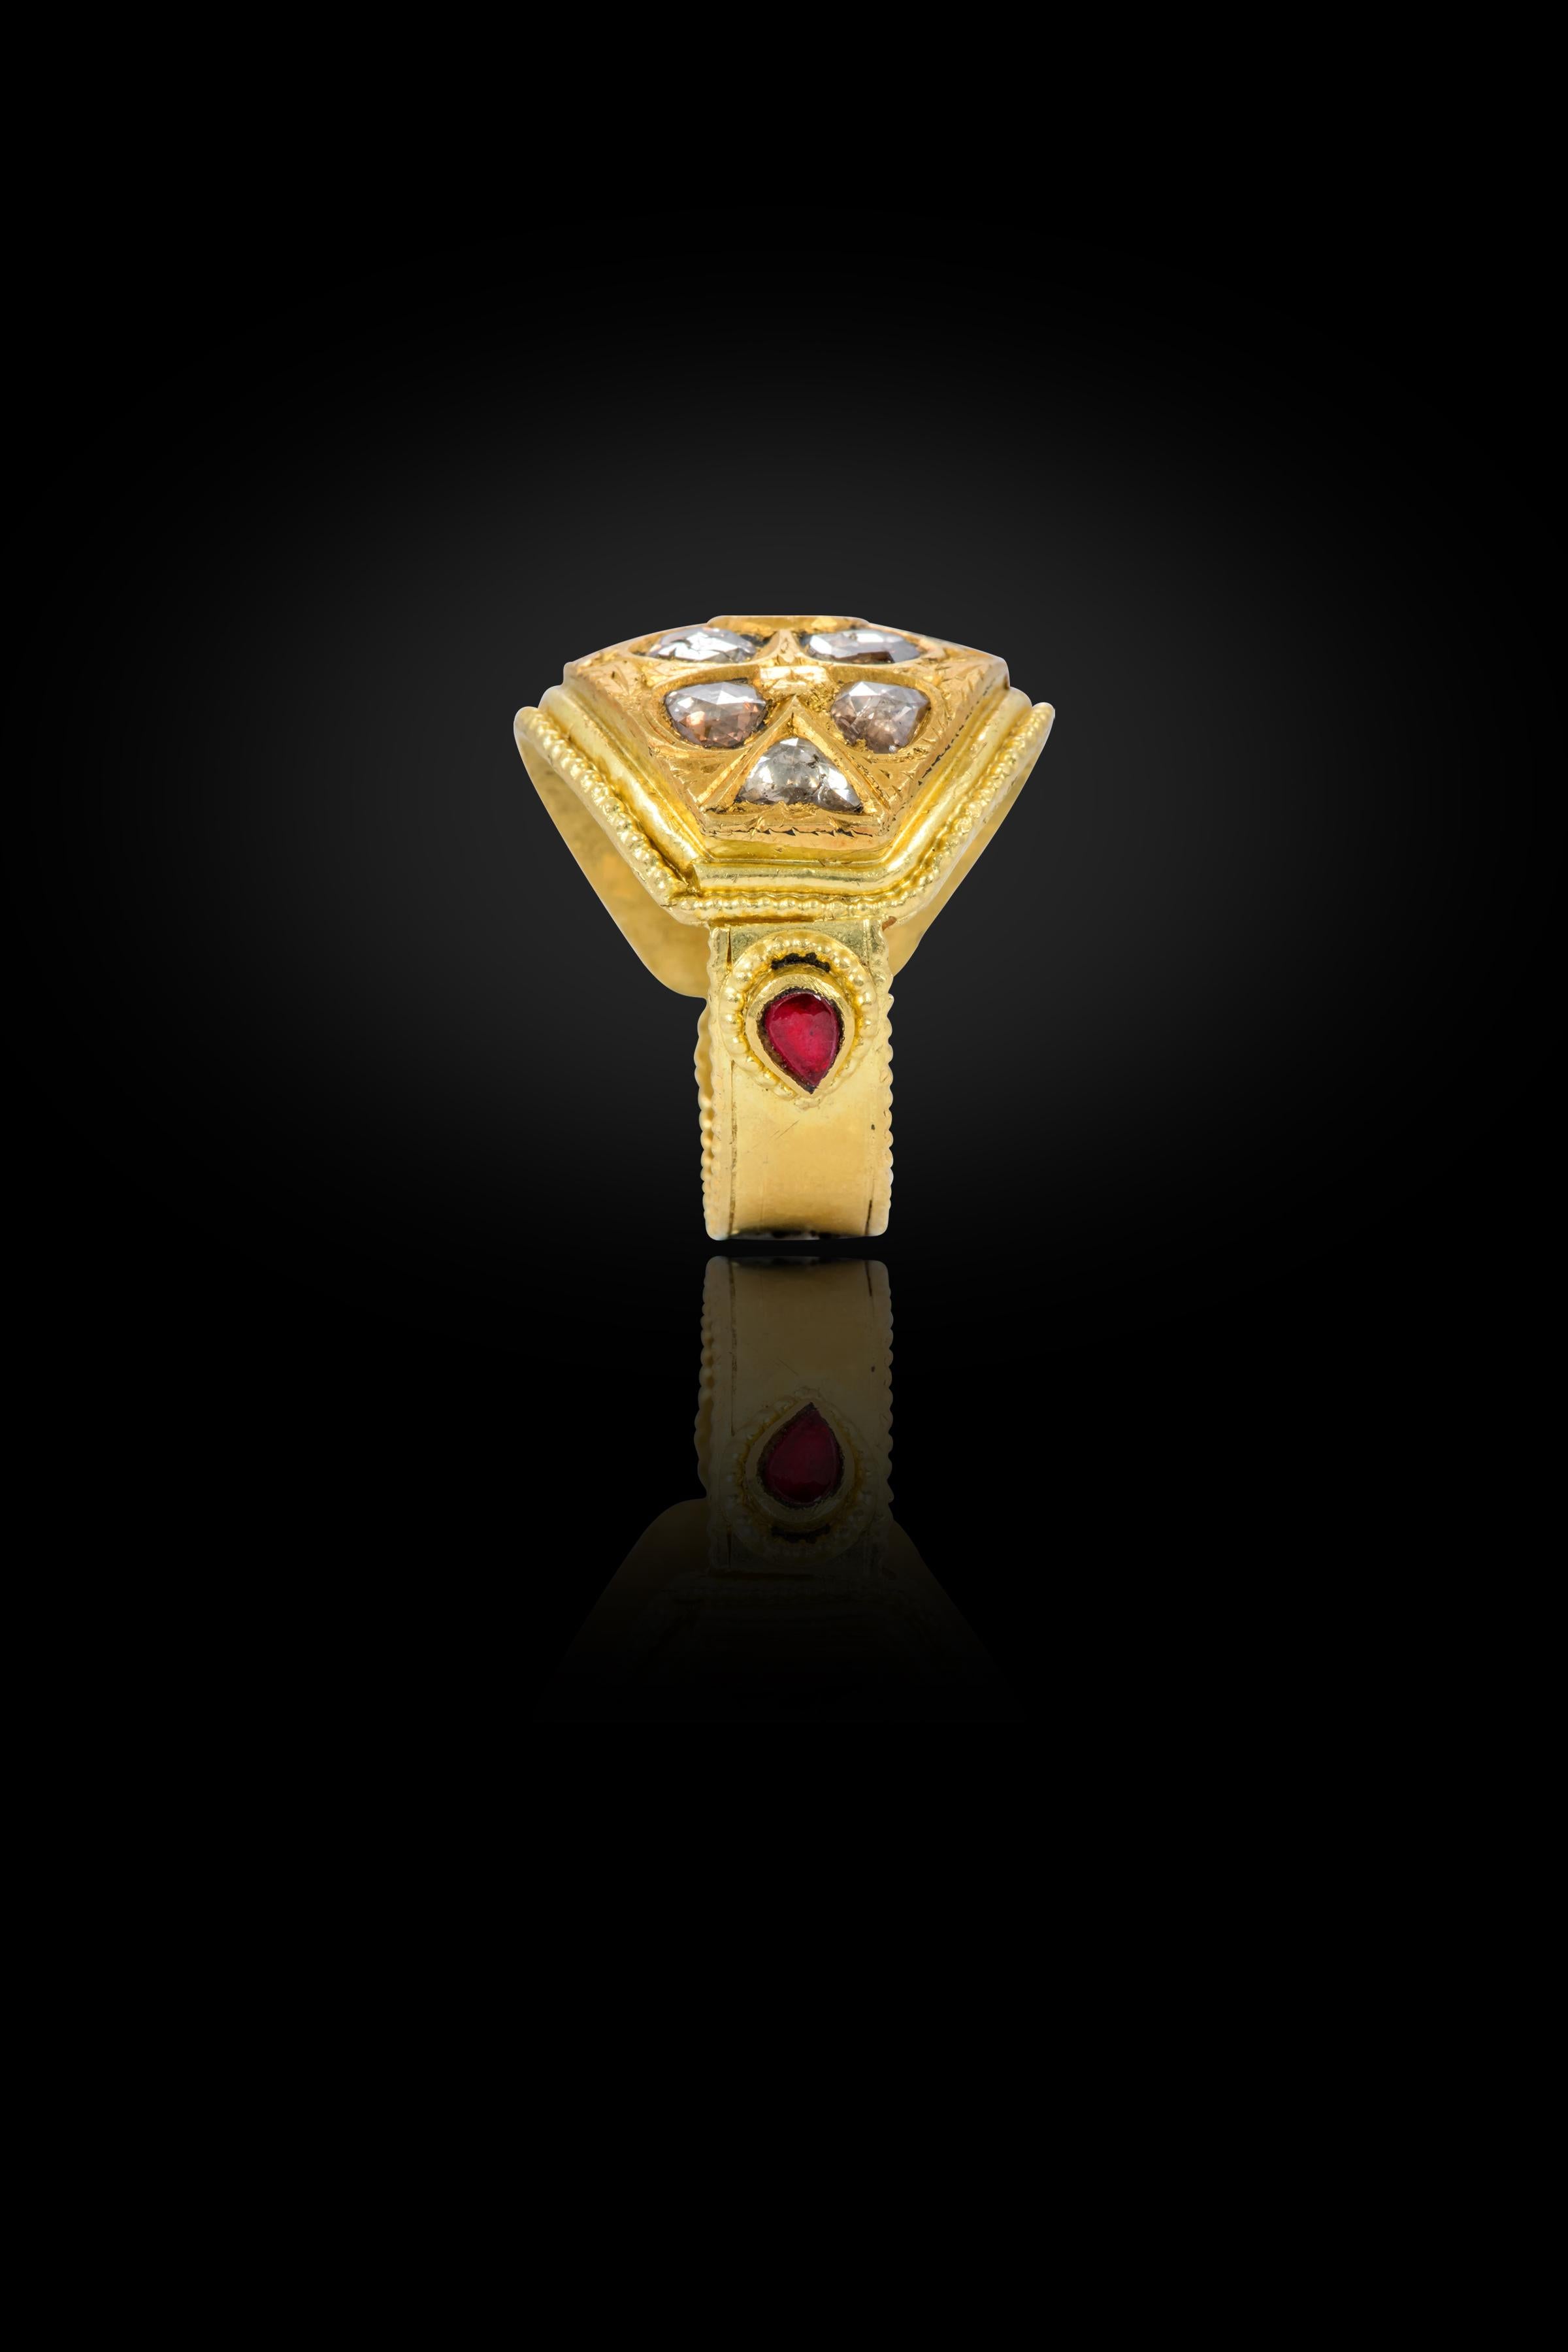 Uncut 22 Karat Yellow Gold Dome-Shape Diamond and Ruby Statement Ring Handcrafted For Sale